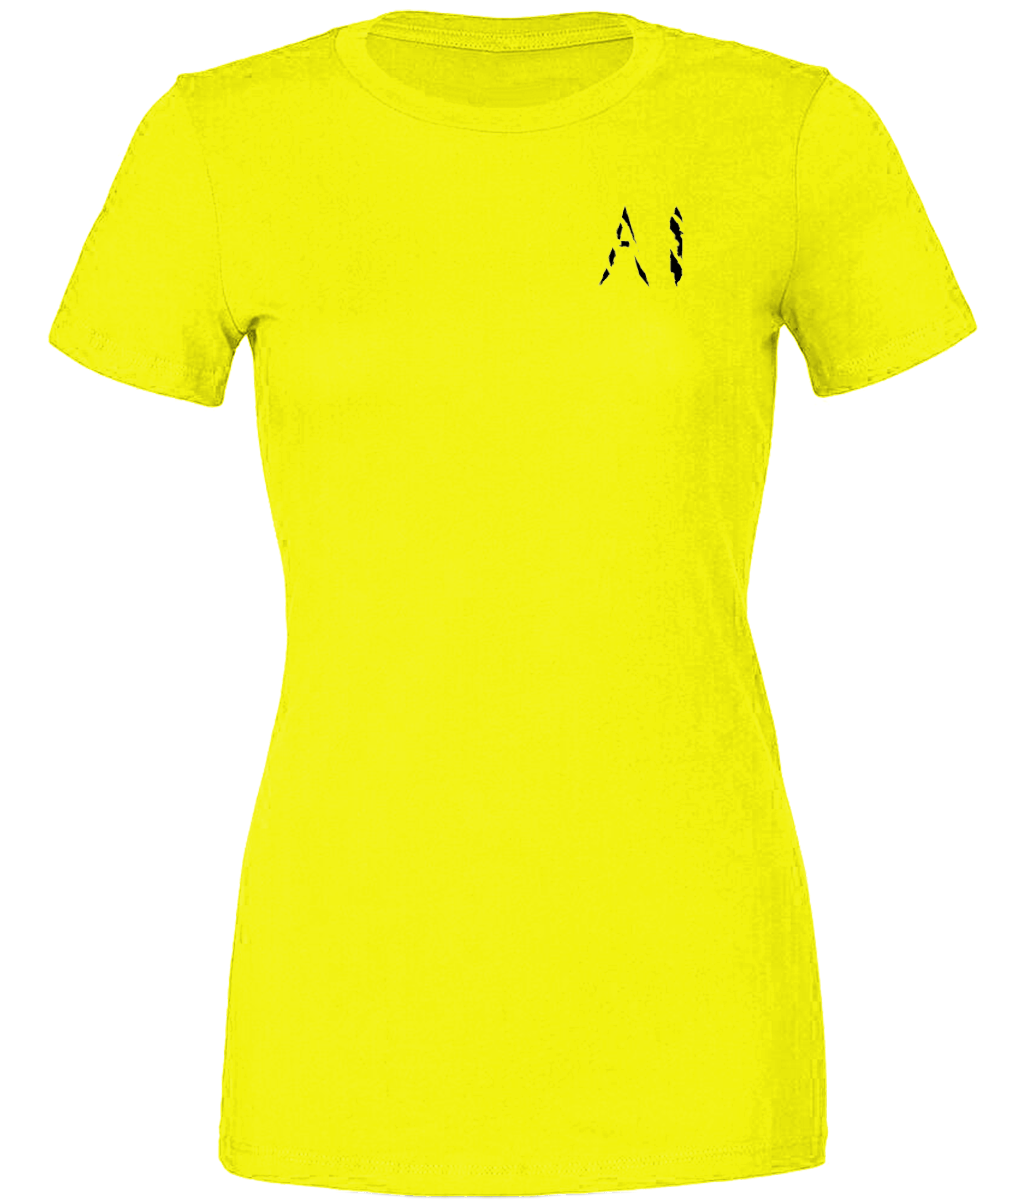 Womens yellow Casual T-Shirt with Black AI logo on left breast